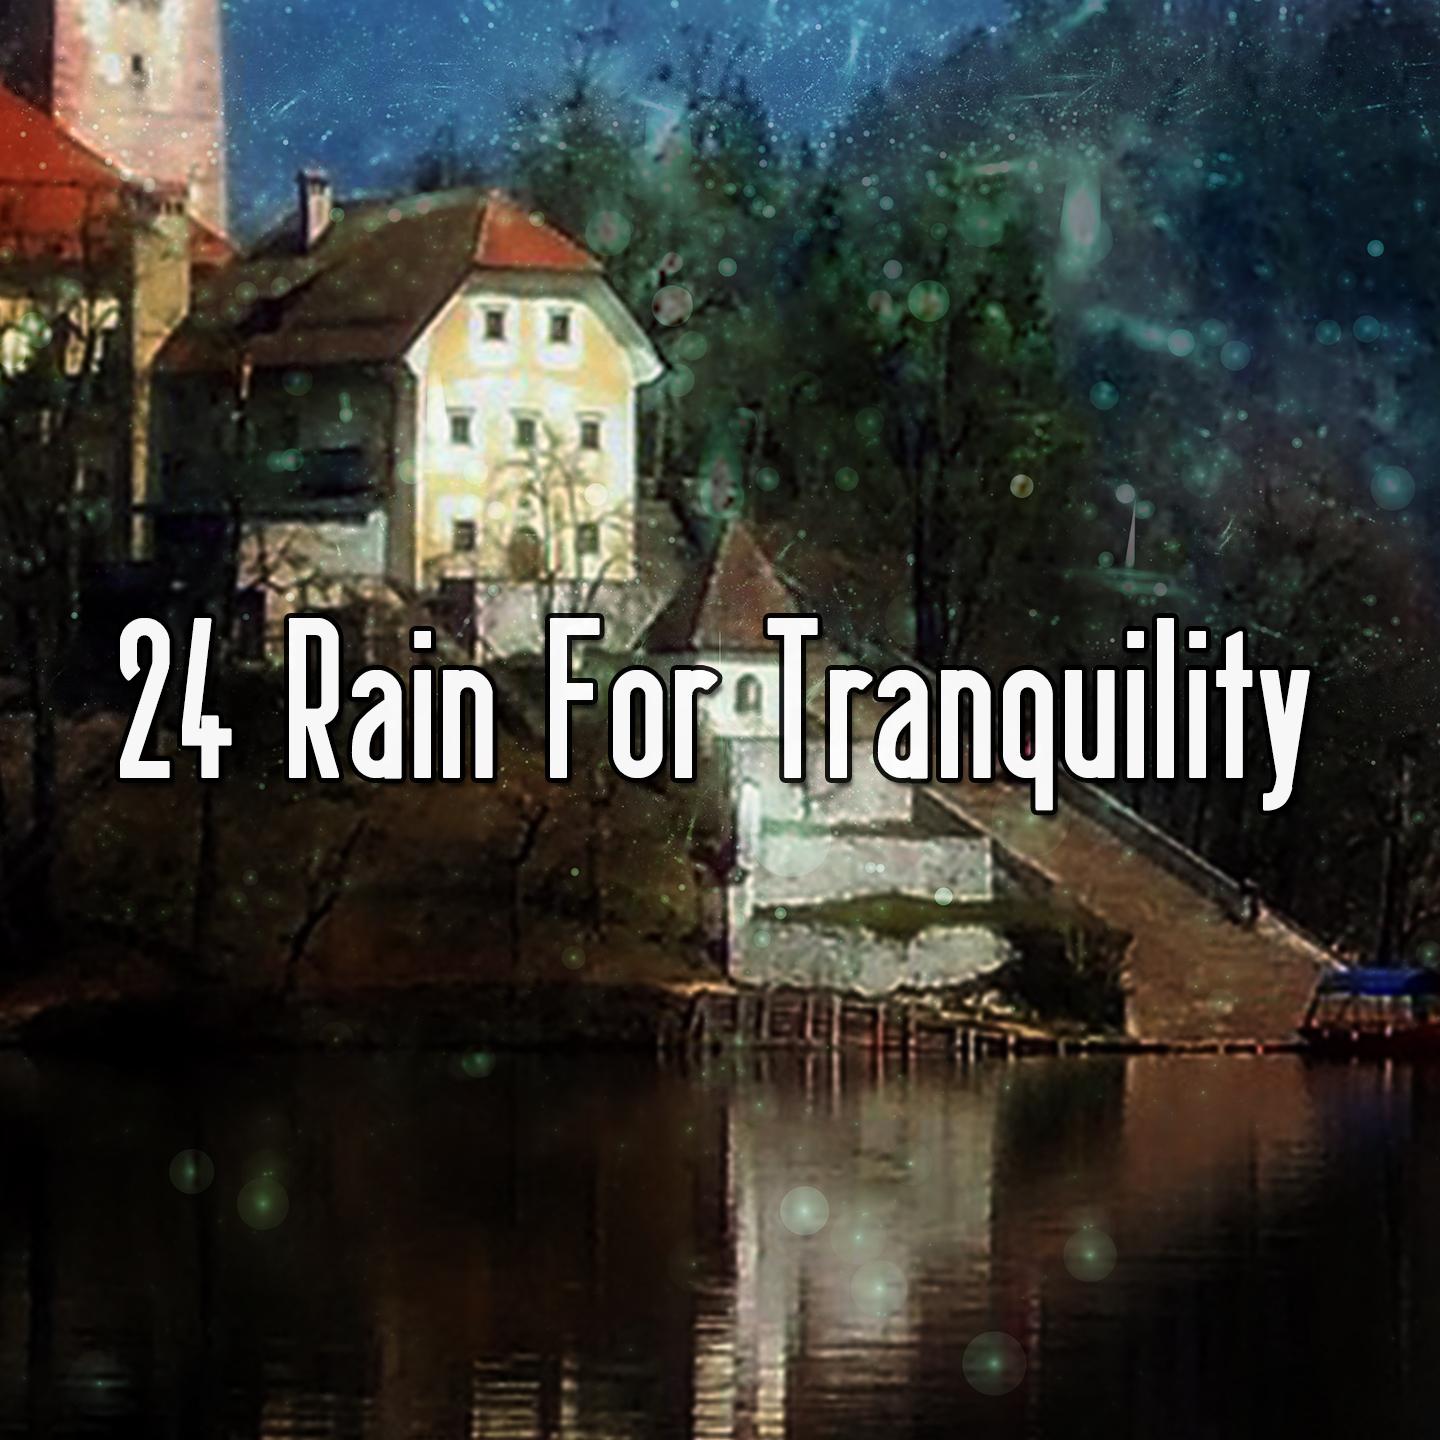 24 Rain For Tranquility